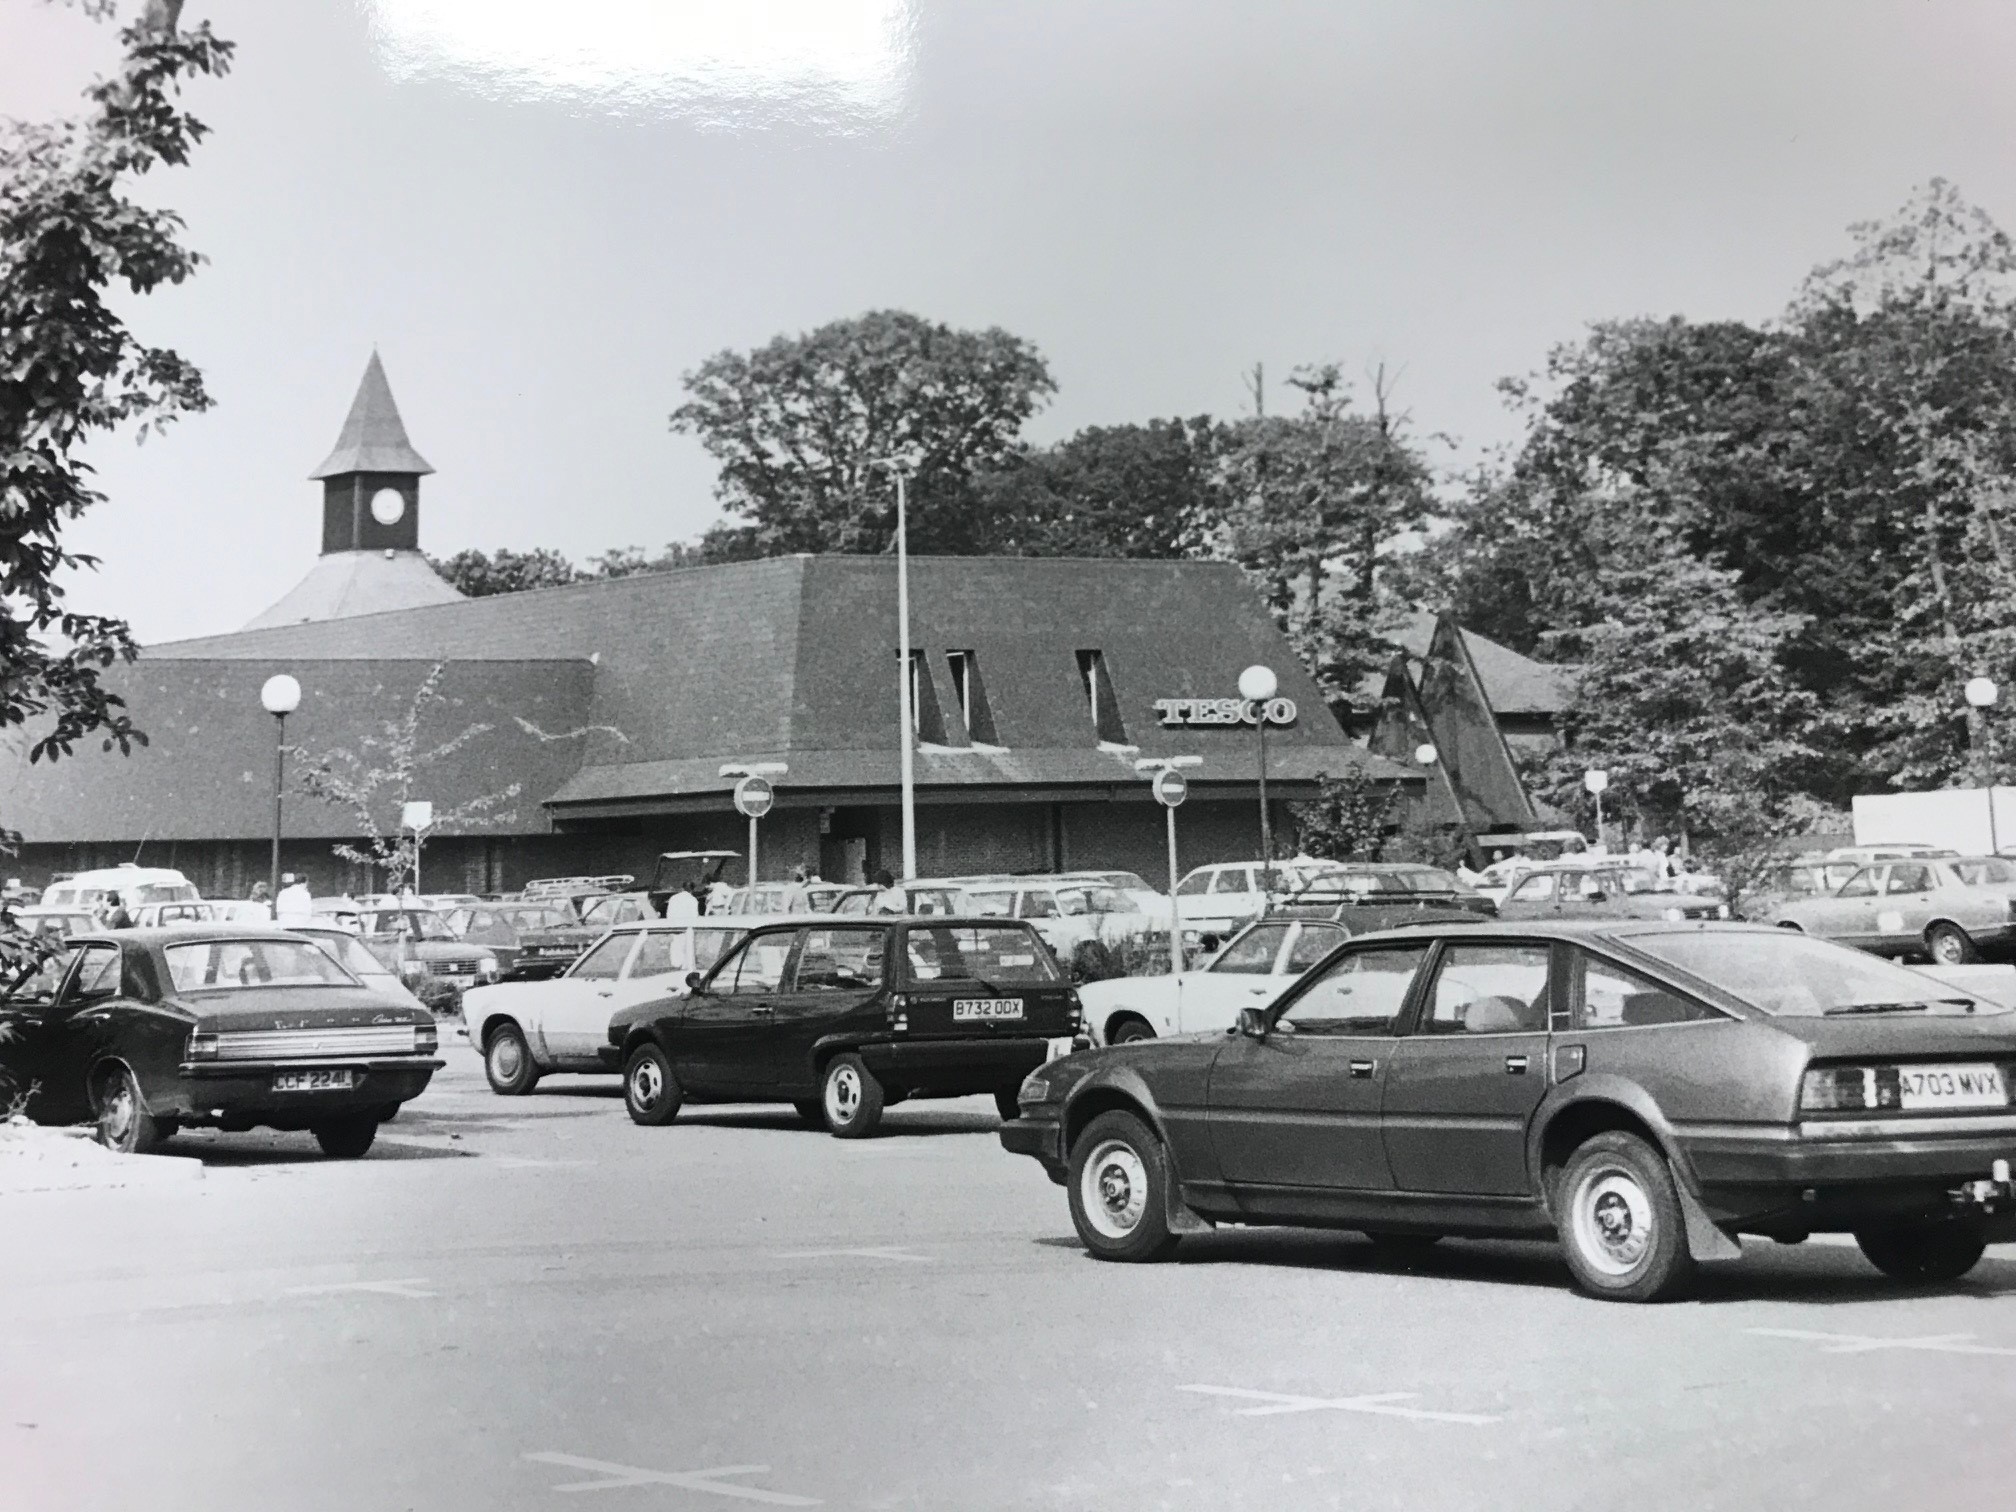 Here is what Tesco at Highwoods looked like back in the eighties